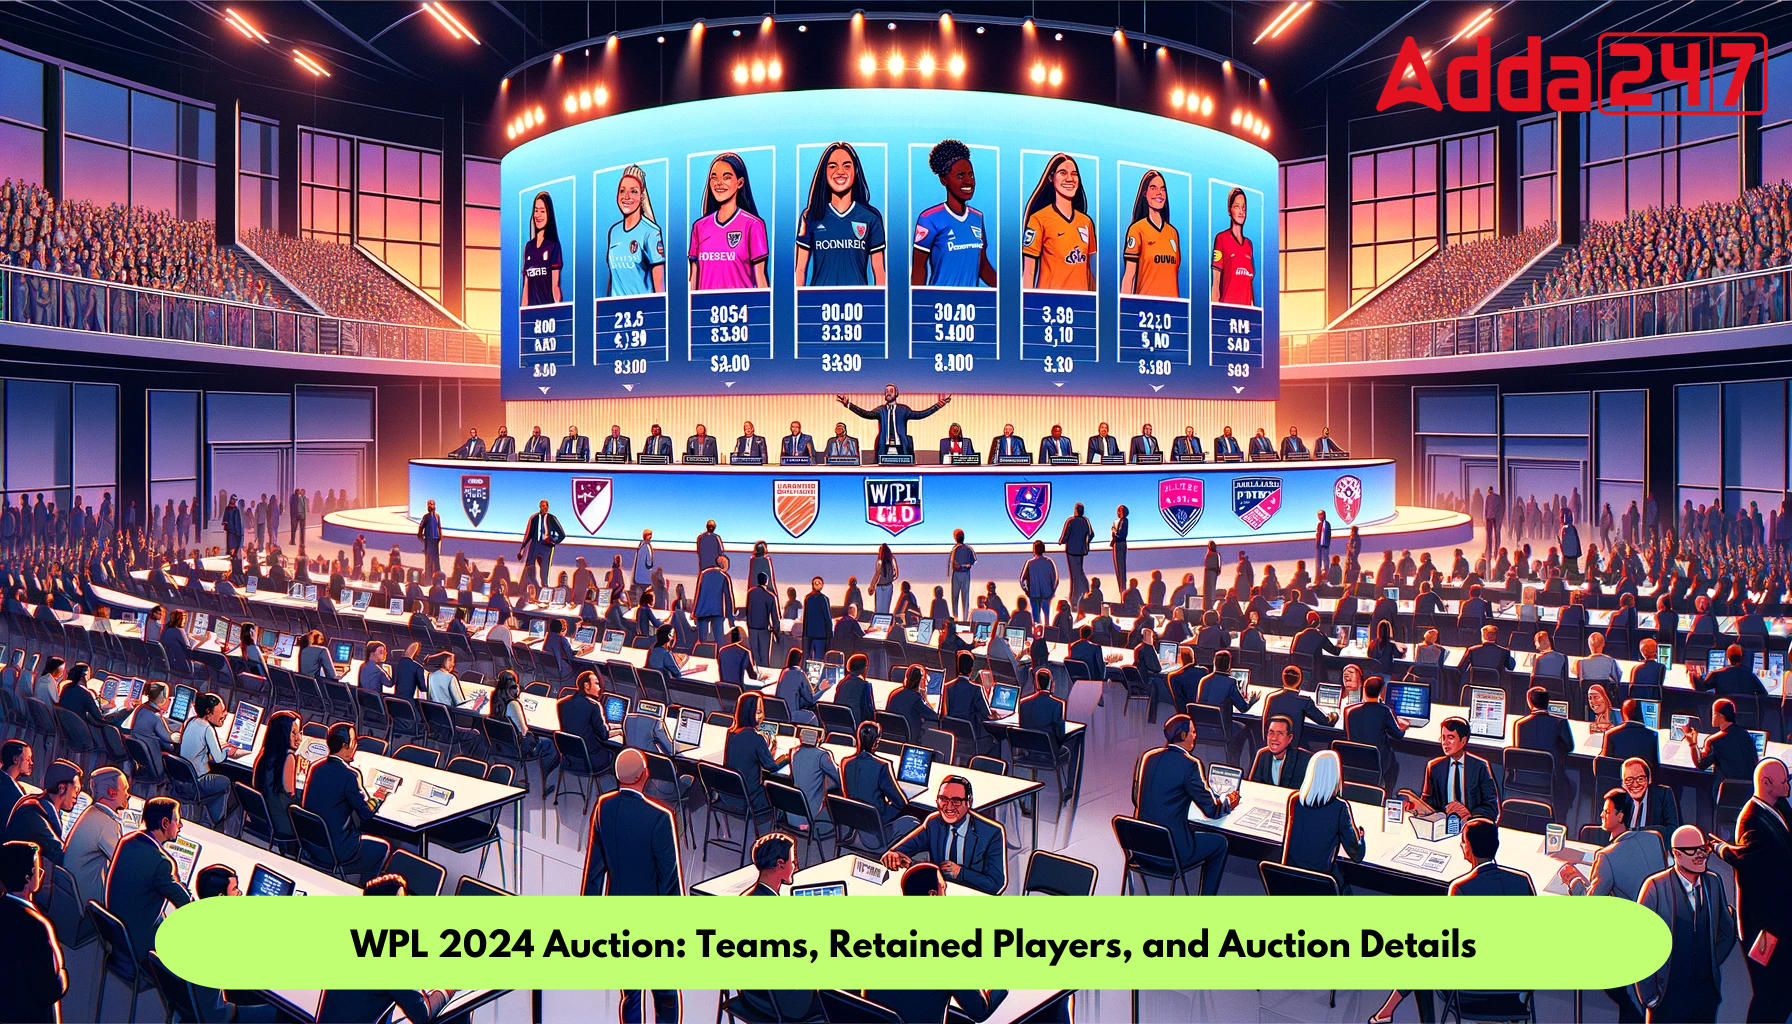 WPL 2024 Auction: Teams, Retained Players, and Auction Details_30.1